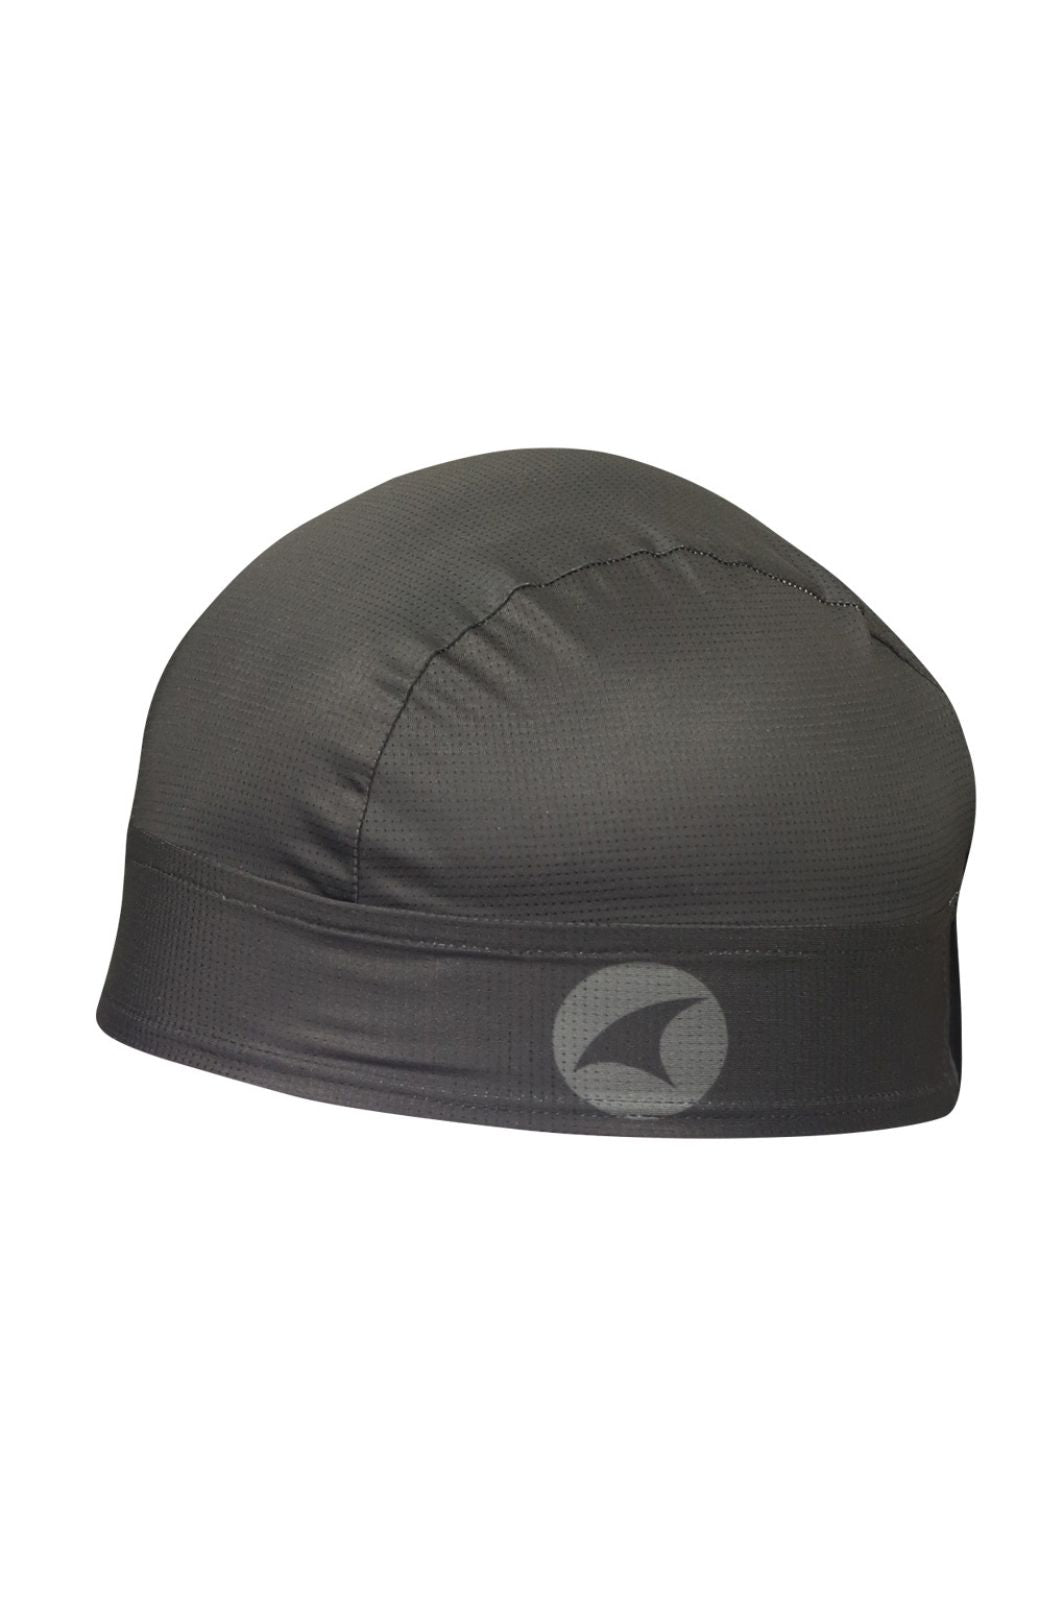 Charcoal Cycling Summer Skull Cap - Left View